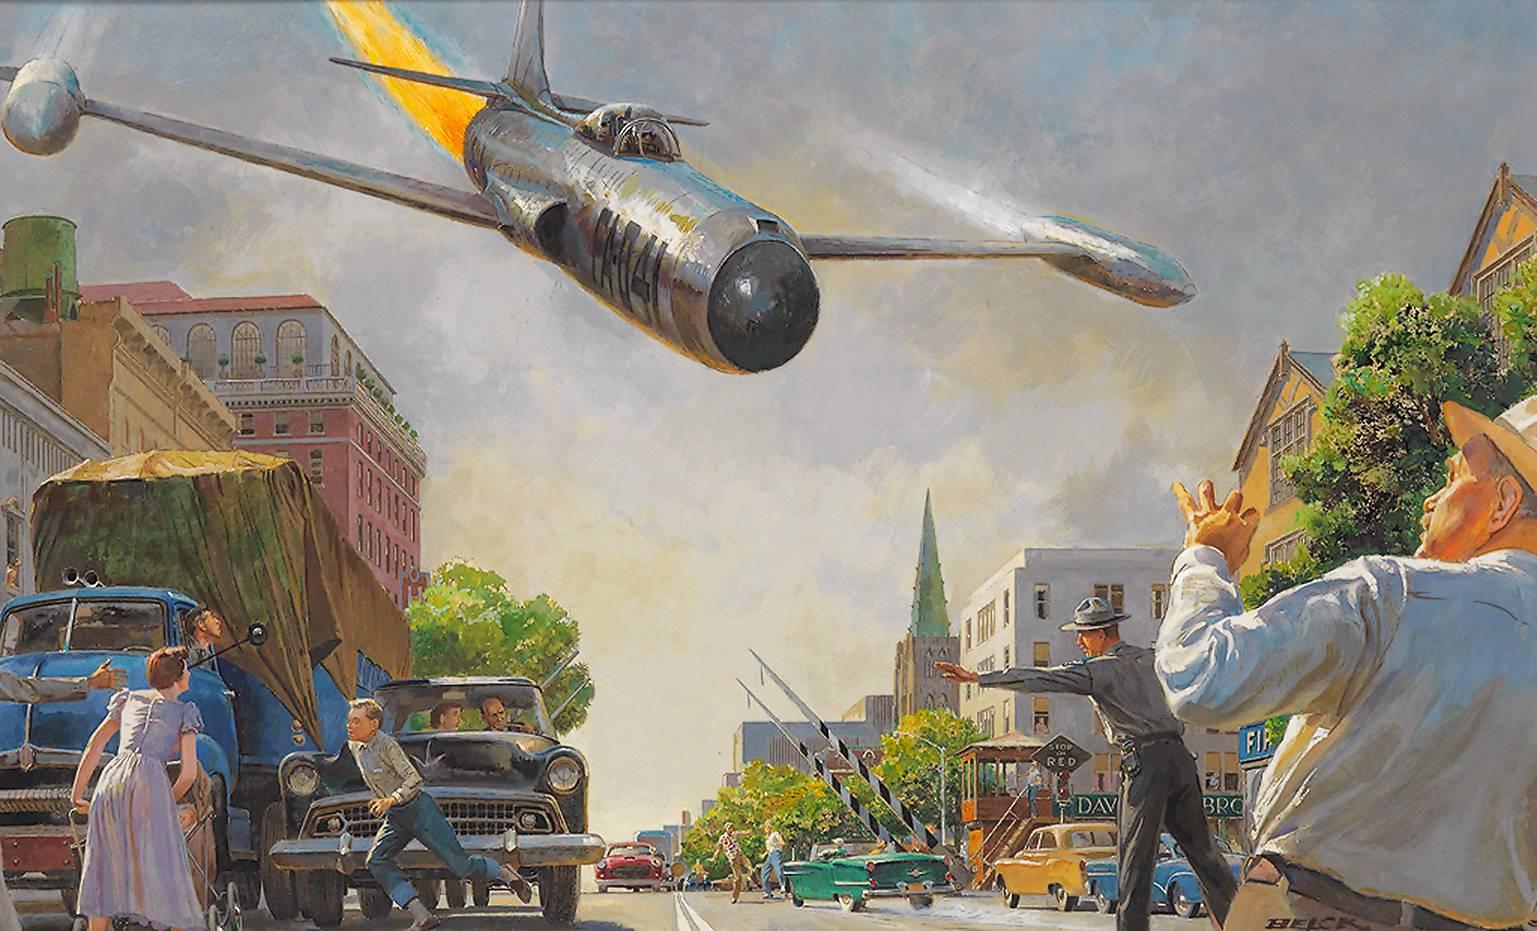 Peter Helck Figurative Painting - Americana "For a horrible instant Carter thought the jet was going to crash